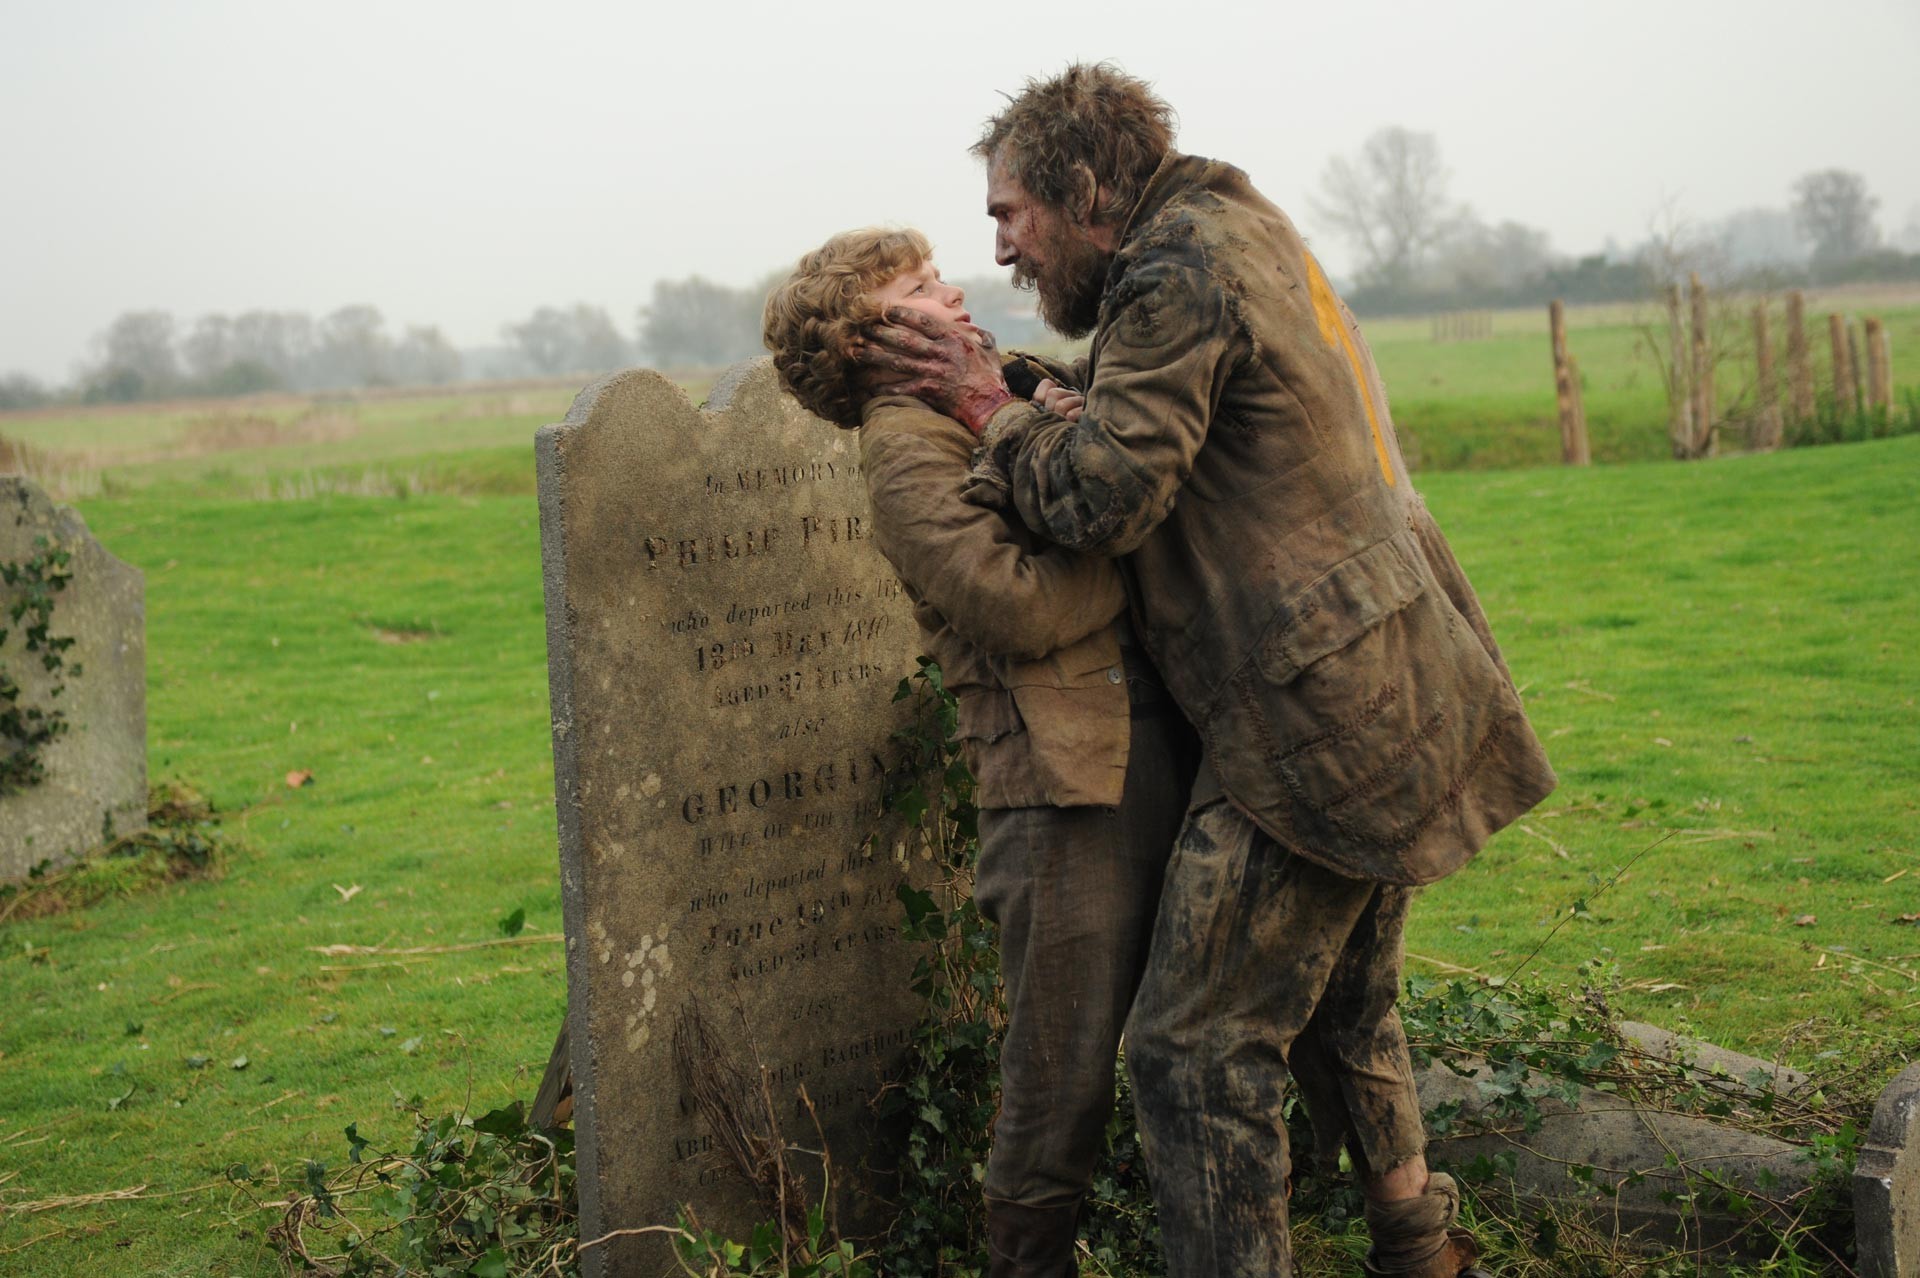 Toby Irvine stars as Young Pip and Jason Flemyng stars as Joe Gargery in Main Street Films' Great Expectations (2013)